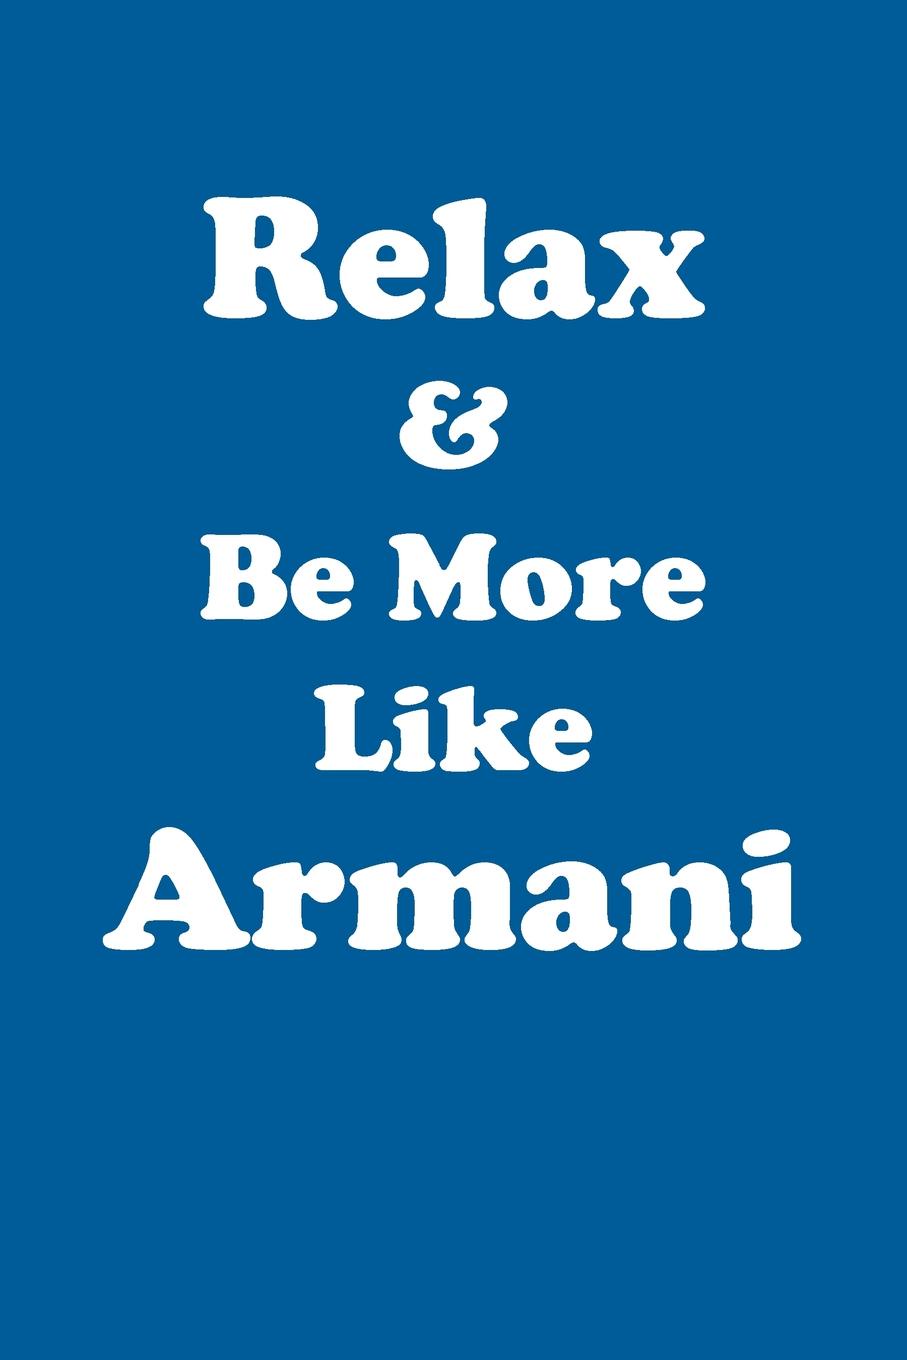 Relax & Be More Like Armani Affirmations Workbook Positive Affirmations Workbook Includes. Mentoring Questions, Guidance, Supporting You